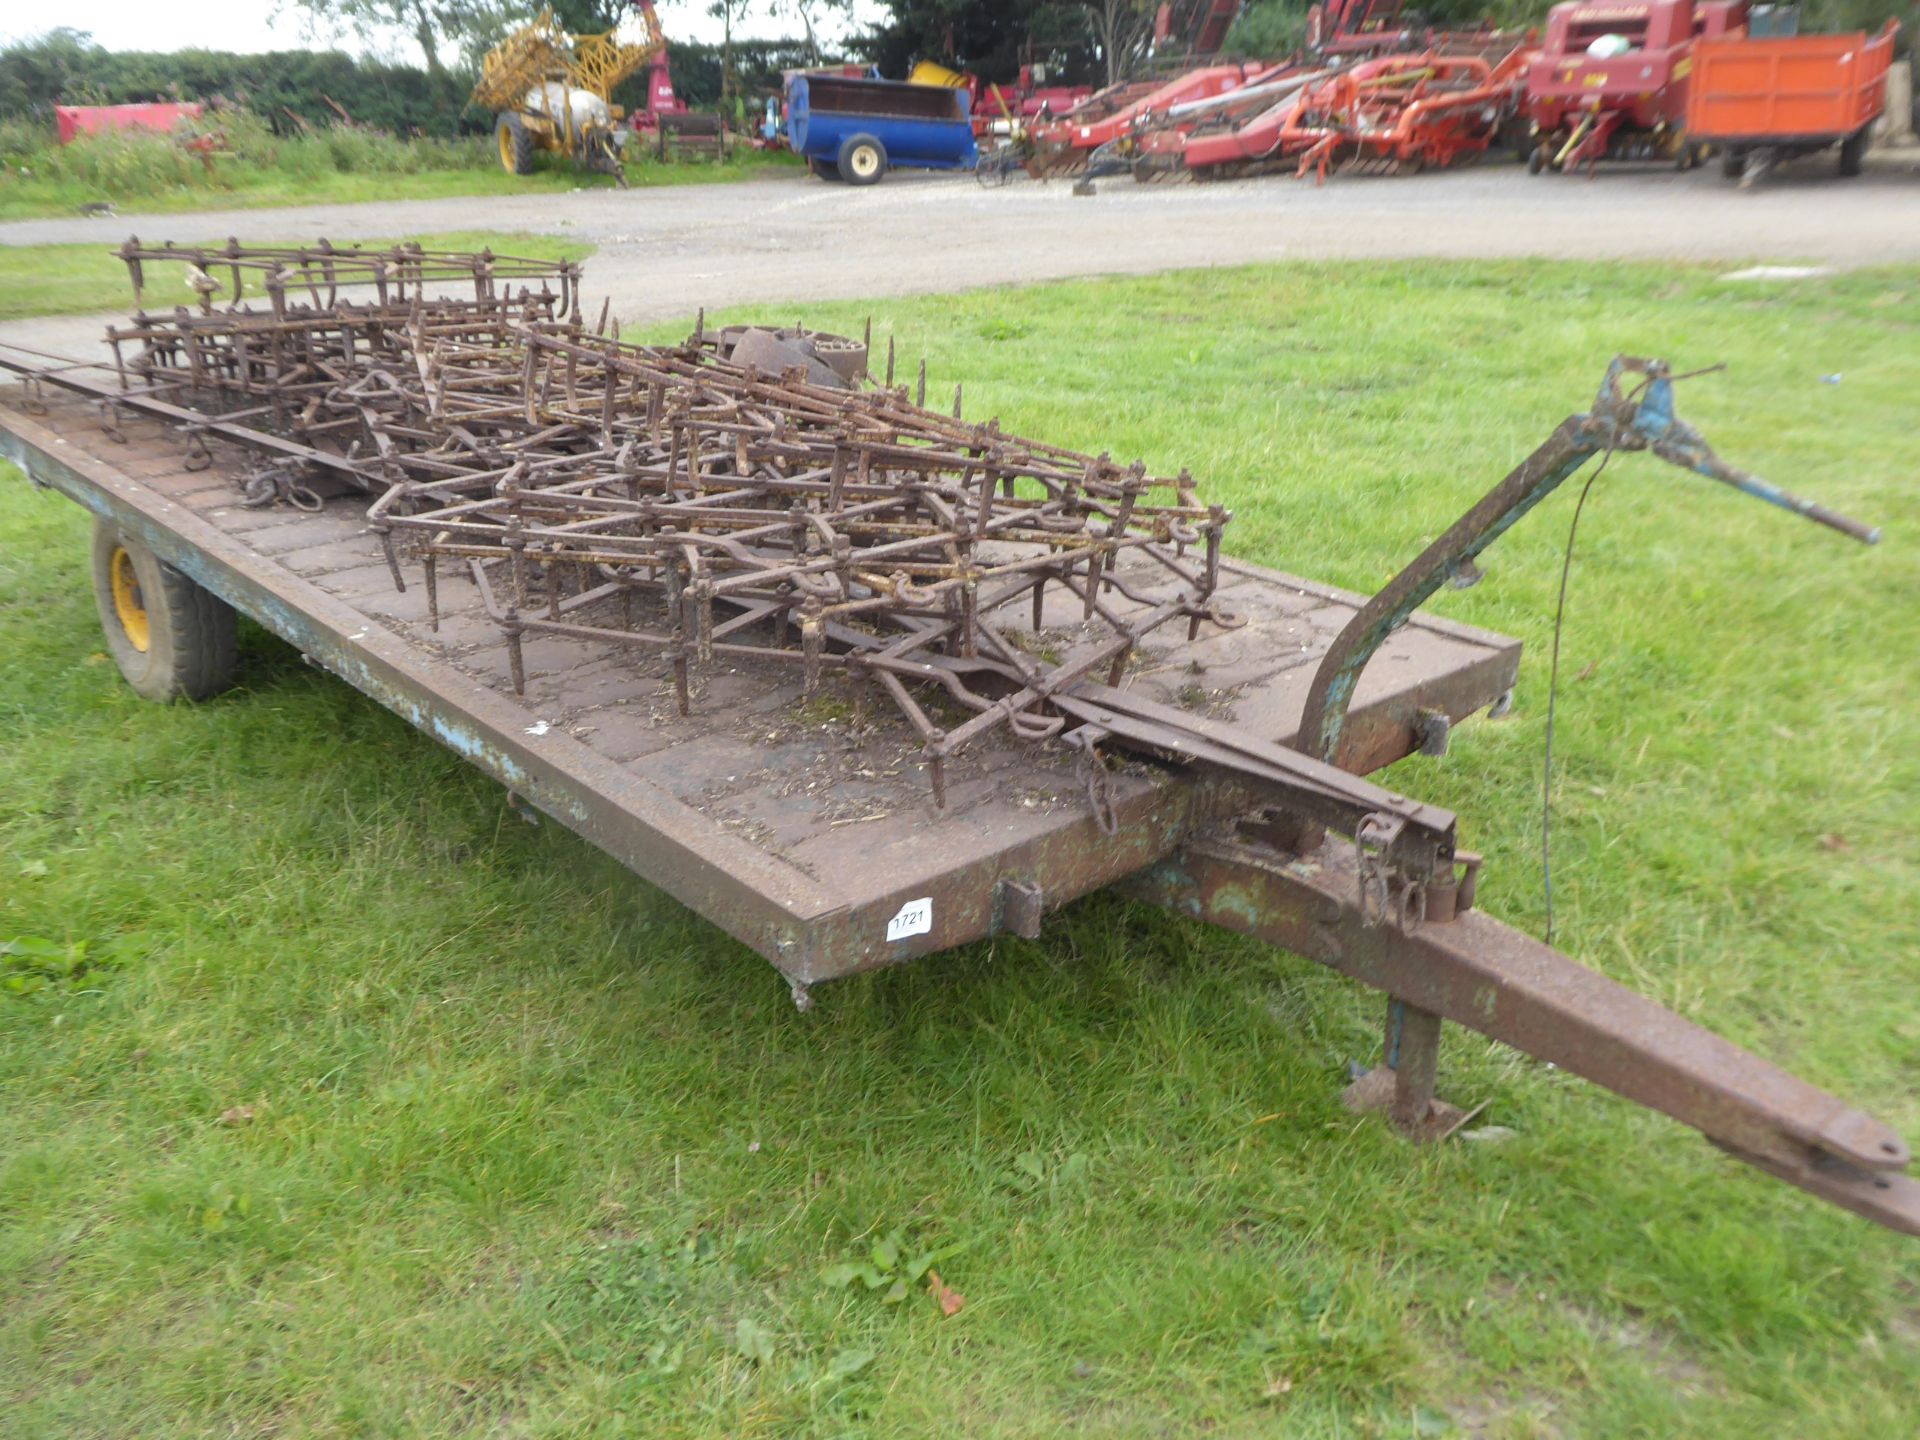 Weeks 15ft flat trailer, single axle with bale gormers and selection of harrows, poor condition